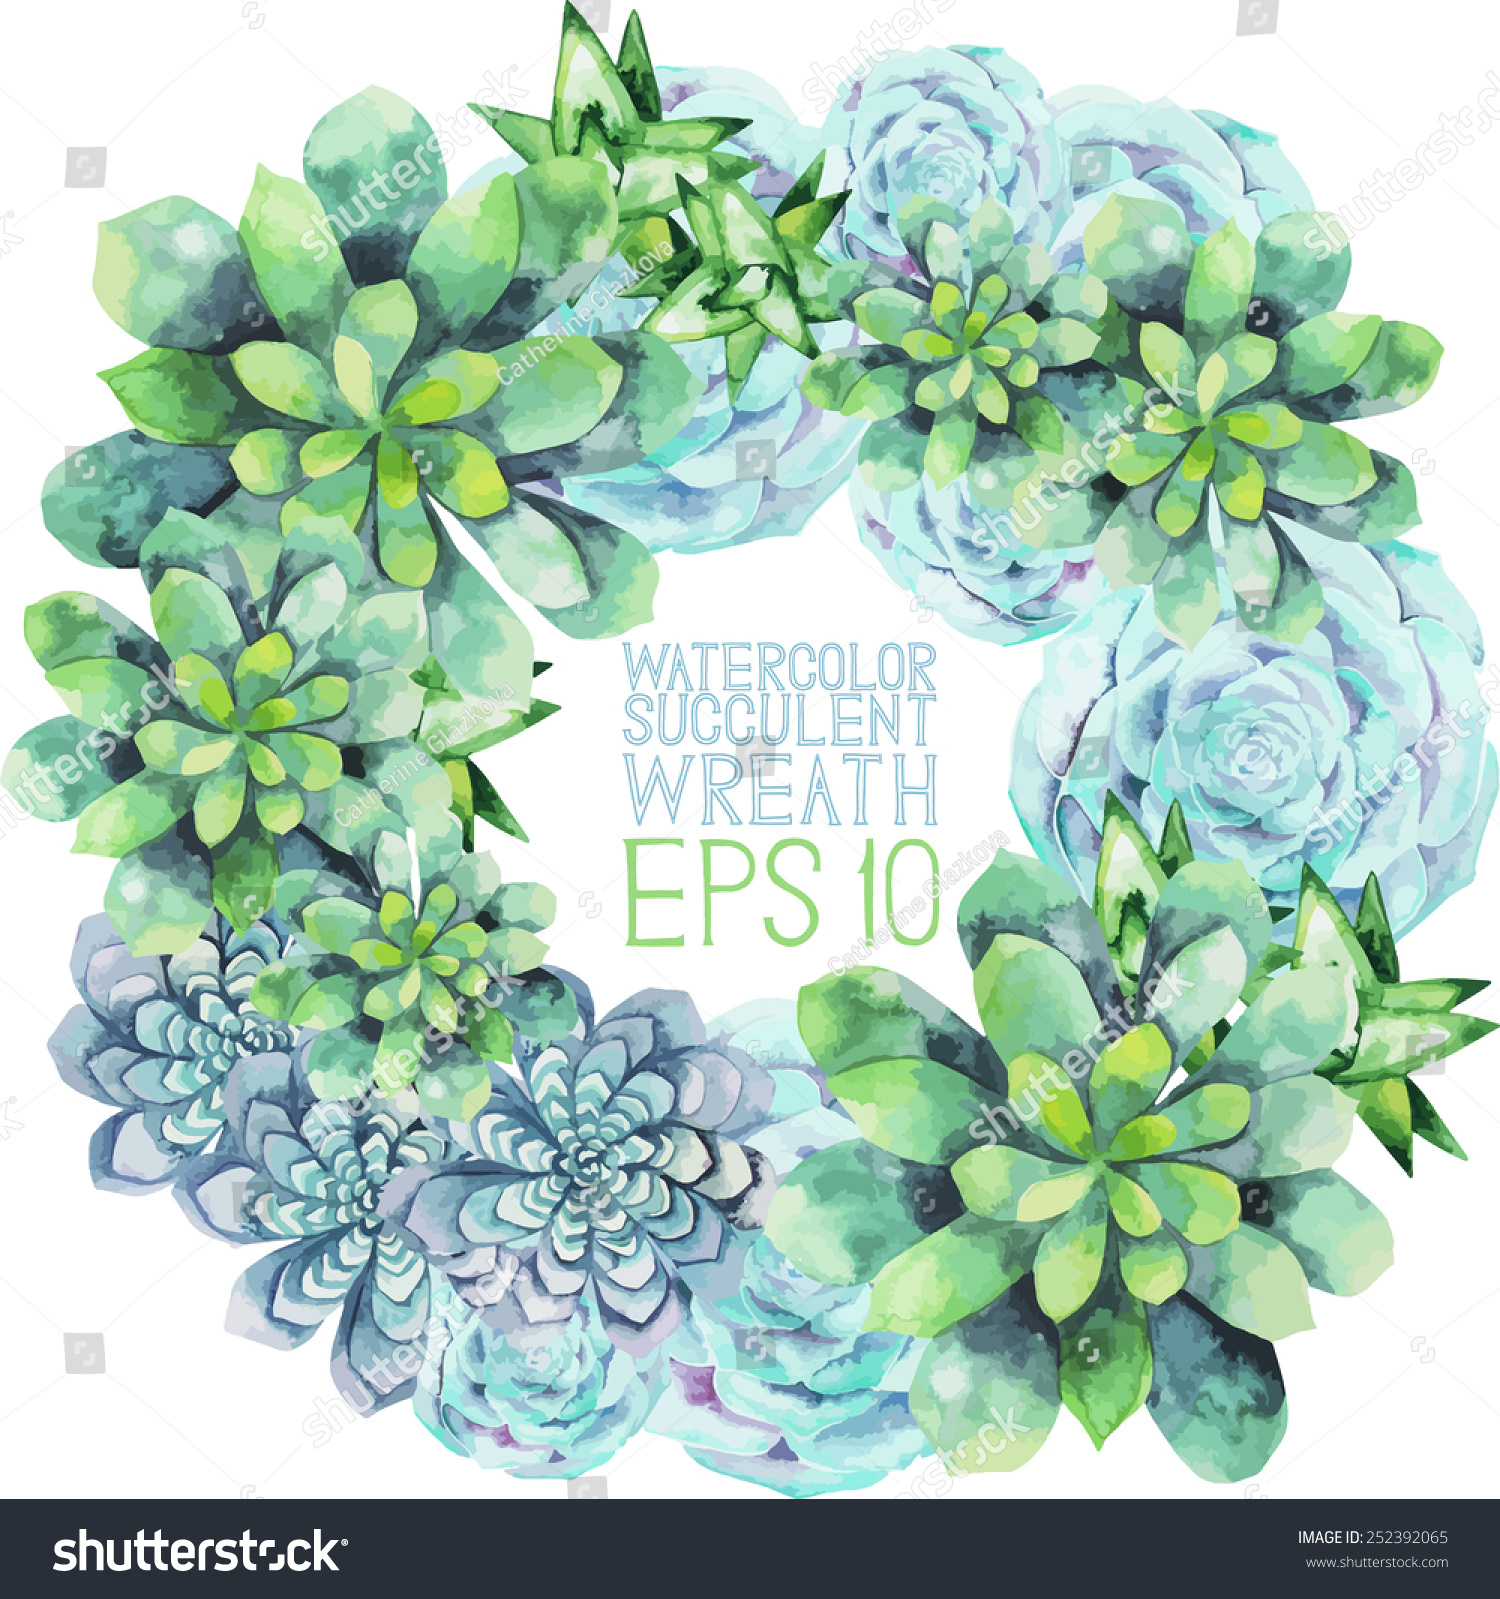 Download Watercolor Succulent Wreath Round Frame Text Stock Vector ...